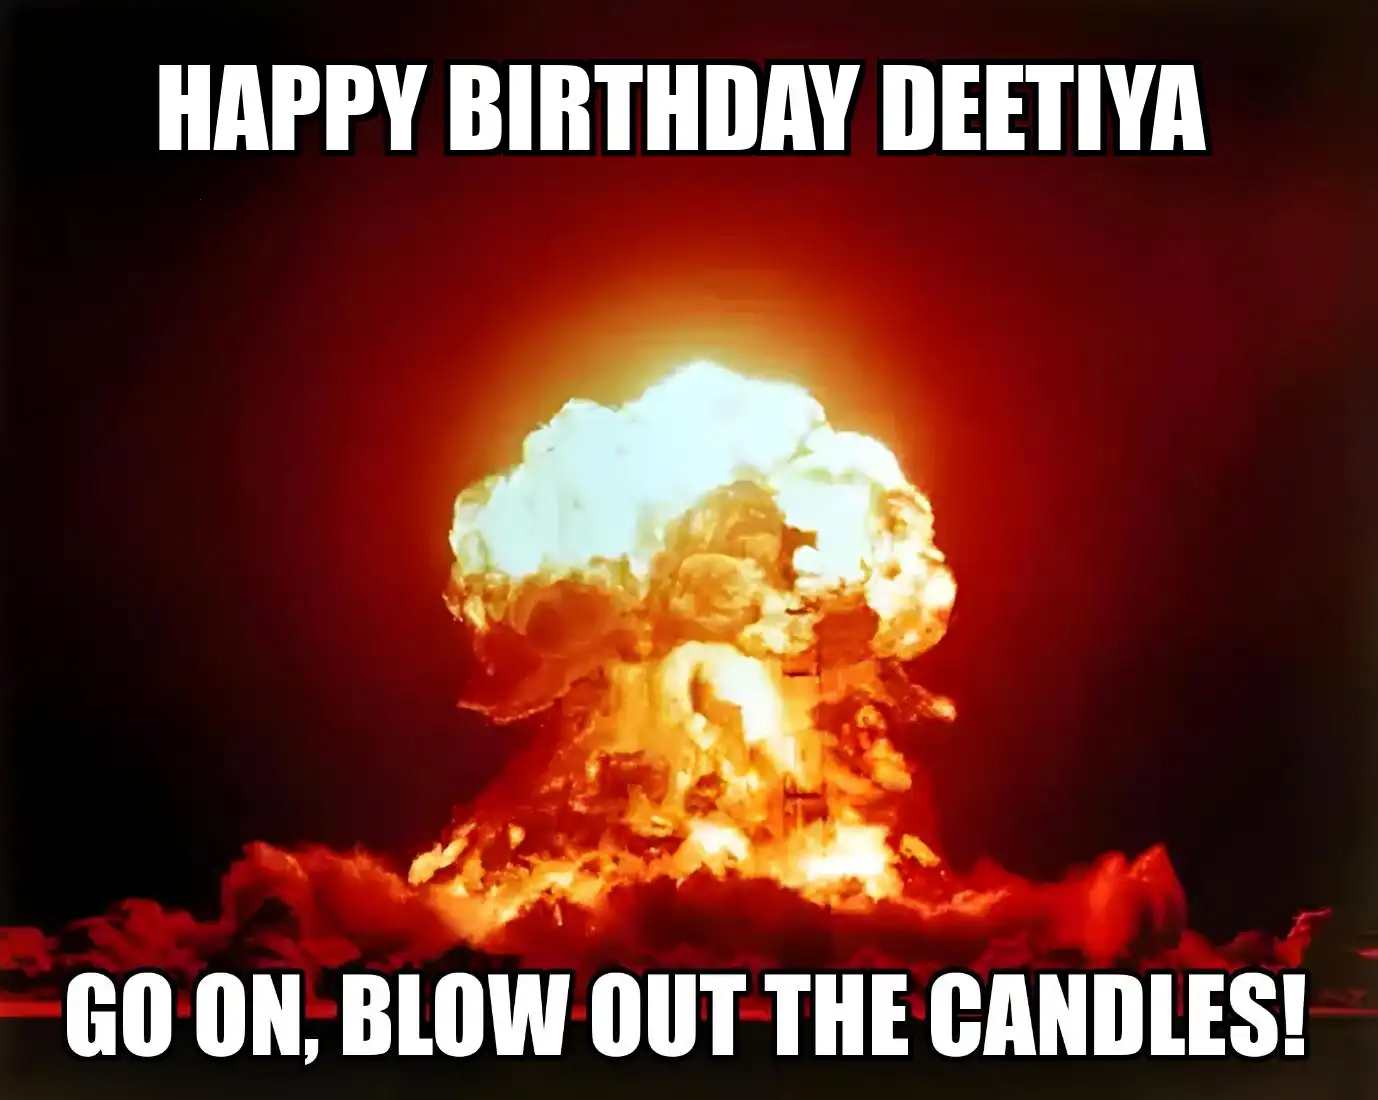 Happy Birthday Deetiya Go On Blow Out The Candles Meme